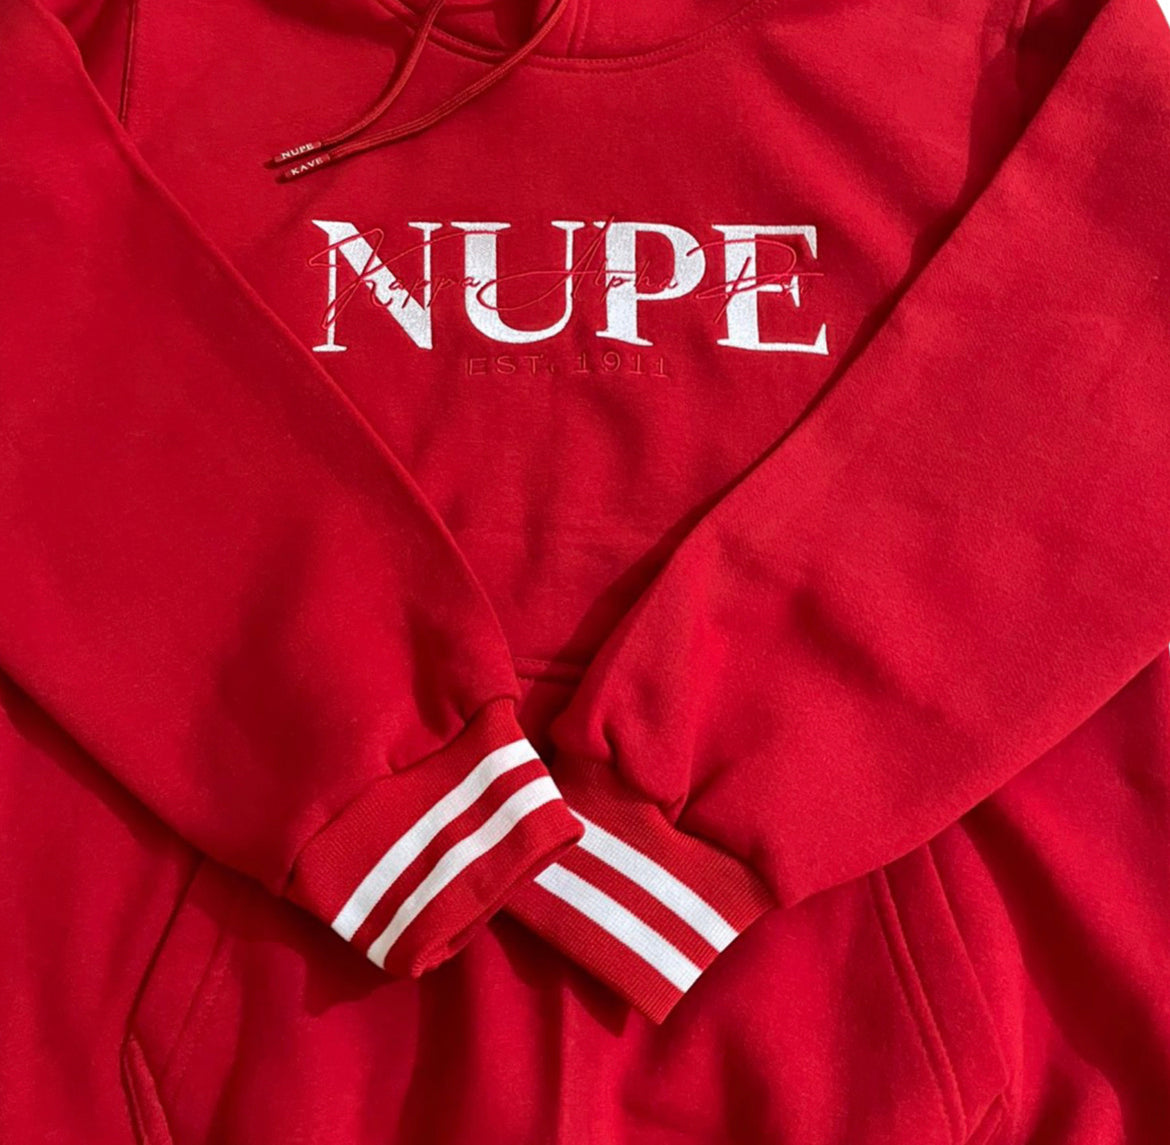 Exclusive Kappa Alpha Psi Stitched Embroidery unique Hoodie. This is the perfect long-sleeved hoodie to wear while showing off your Kappa Alpha Psi fraternity lettering. A comfortable 100% cotton  with a twill Greek letters embroidery across the chest give you the perfect fit. This hoodie is also a perfect gift or your favorite Kappa Man.